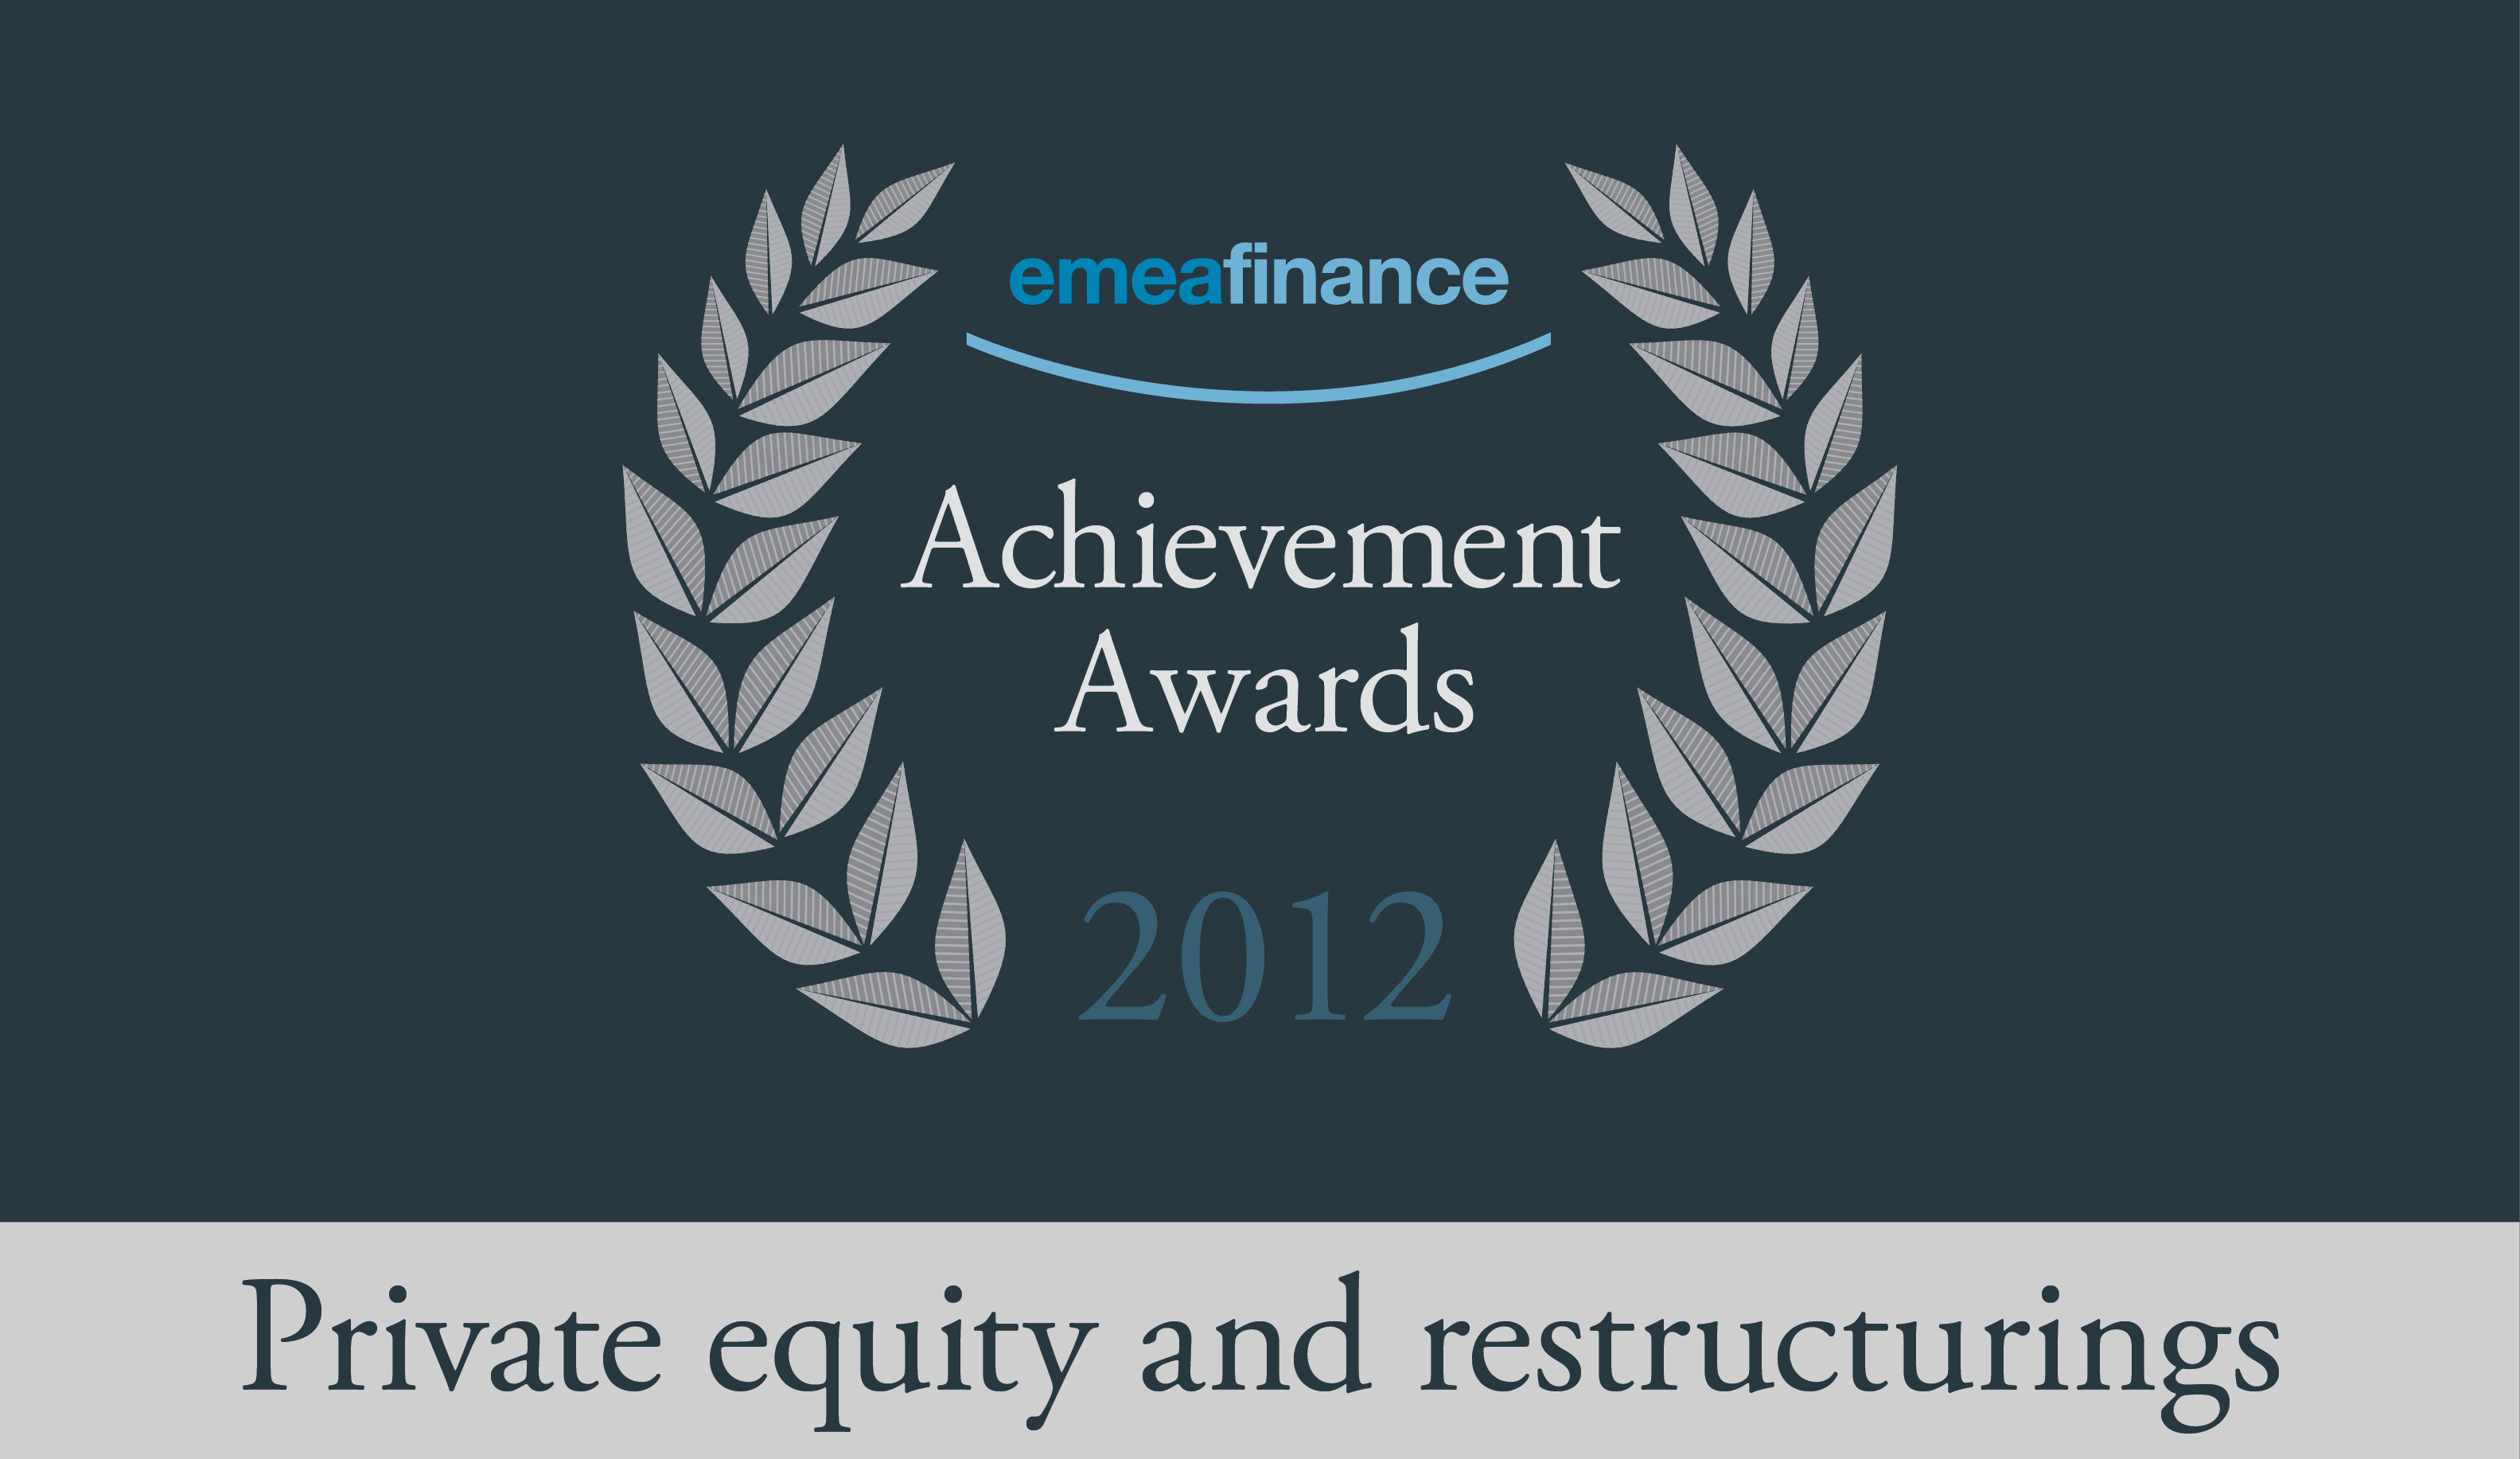 Achievement Awards 2012: Private equity and restructuring